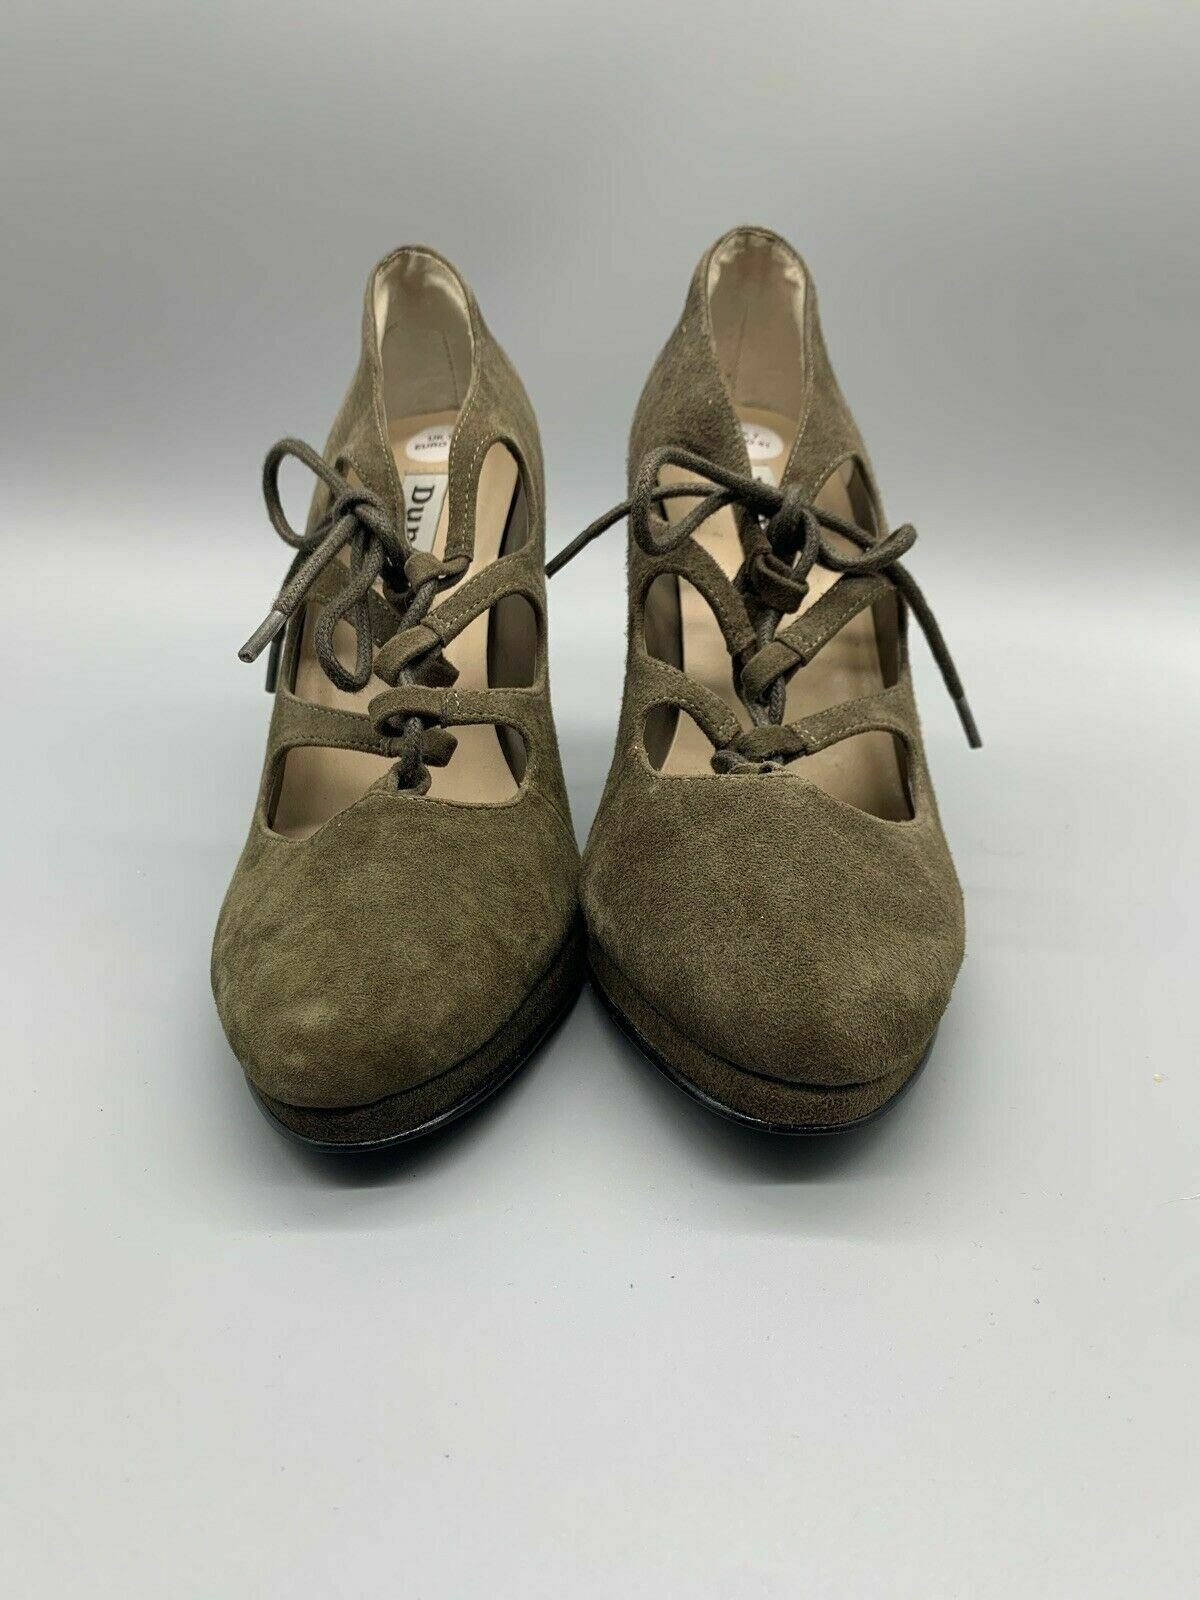 Dune Suede Lace Up High Heels Size 7 UK / 40 Euro Brown